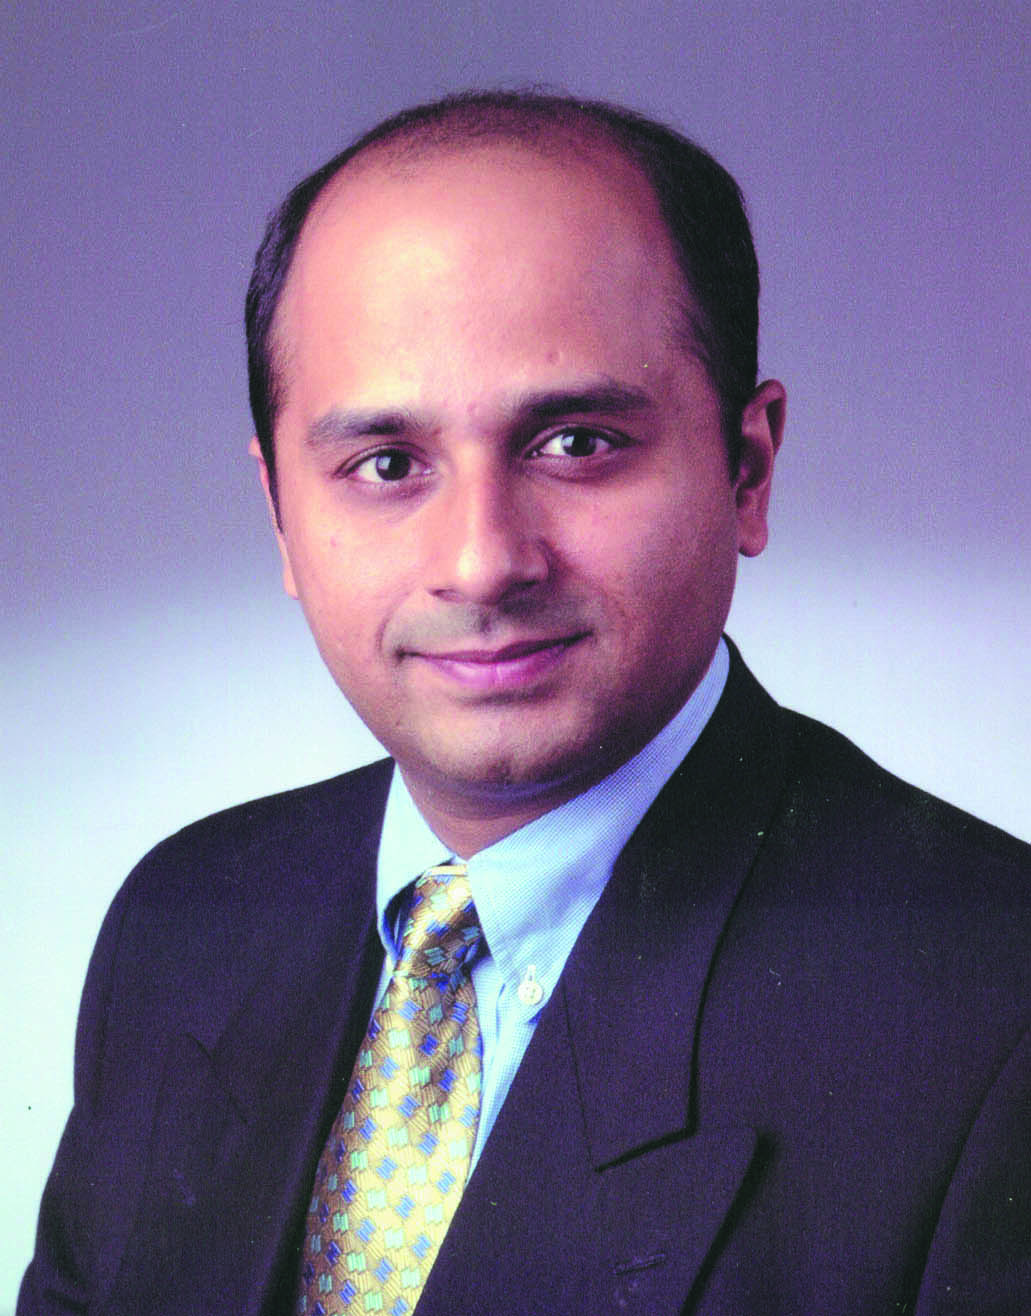 Kashif Khan, MD - An Employed Provider of Memorial Healthcare